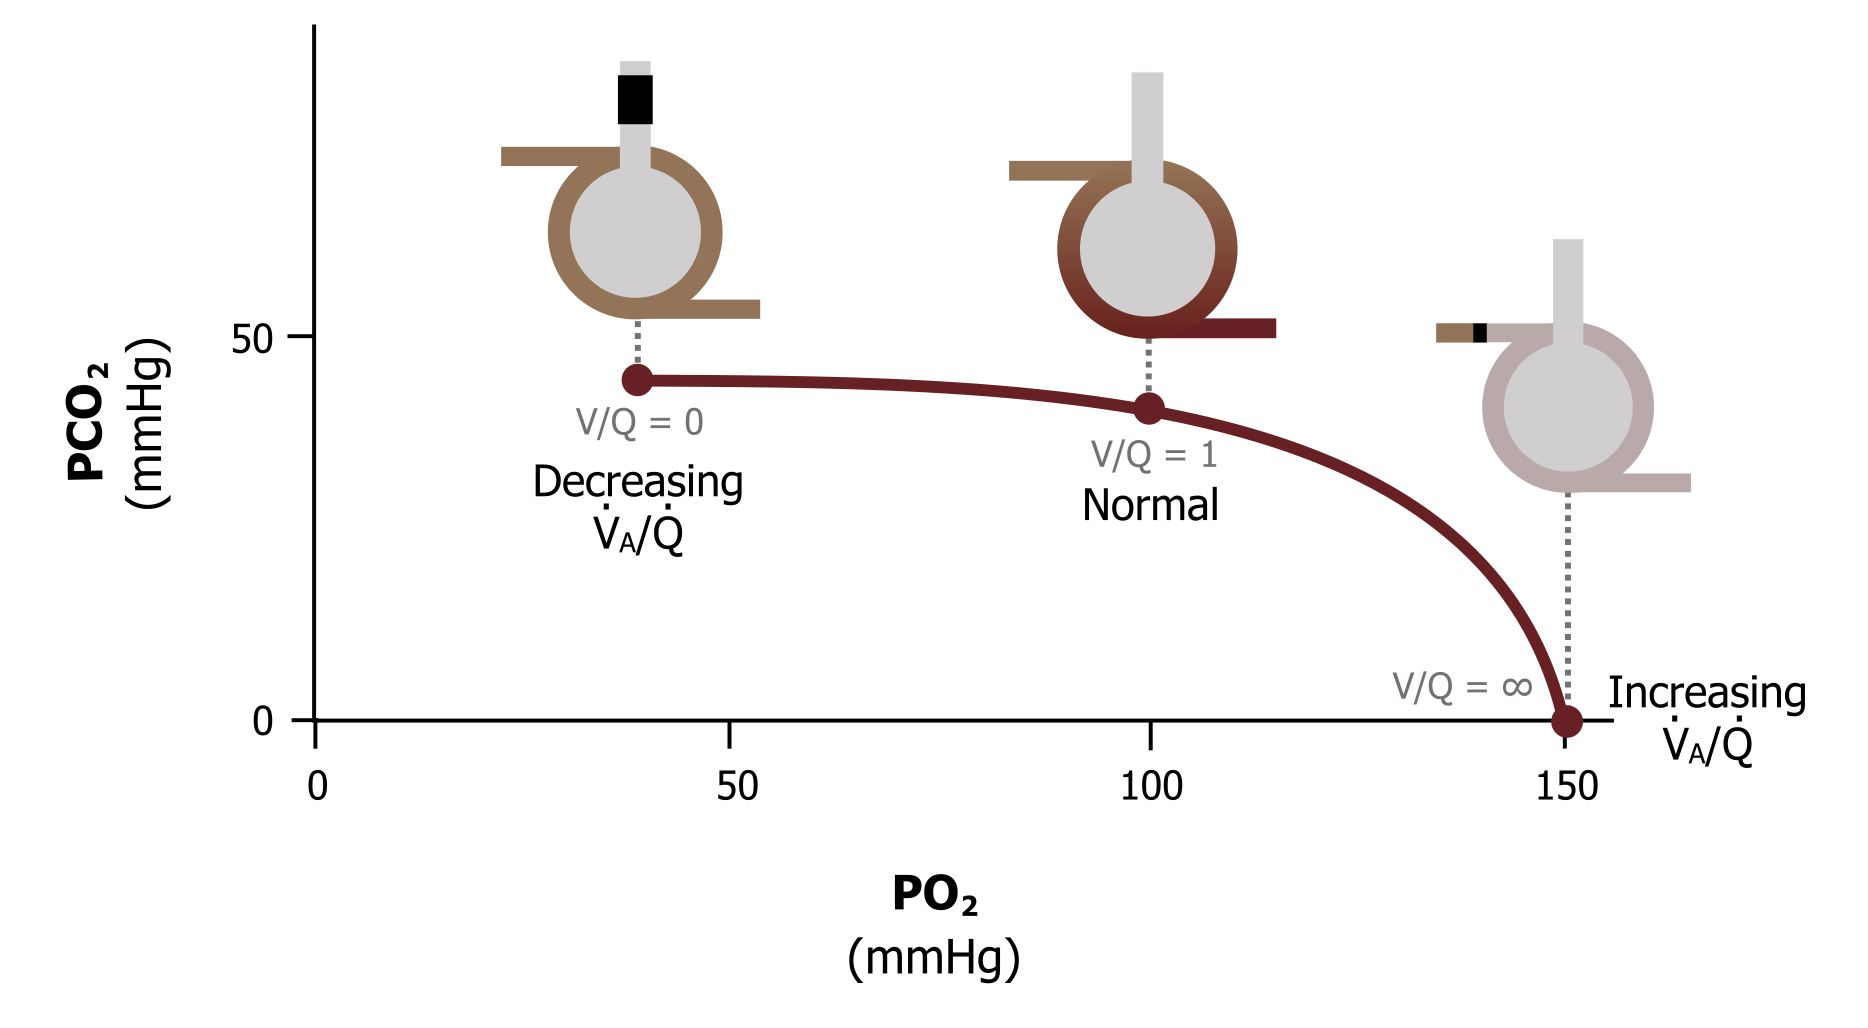 Graph with y-axis labeled PCO2 mmHg ranging from 0 to 50 and x-axis labeled PO2 mmHg ranging from 0 to 150. Normal (figure 12.2) at (11,40) with line moving to the left to decreasing VA/Q (figure 12.3) at (40, 40) and line moving to the right to increasing VA/Q (figure 12.4) at (150, 0)